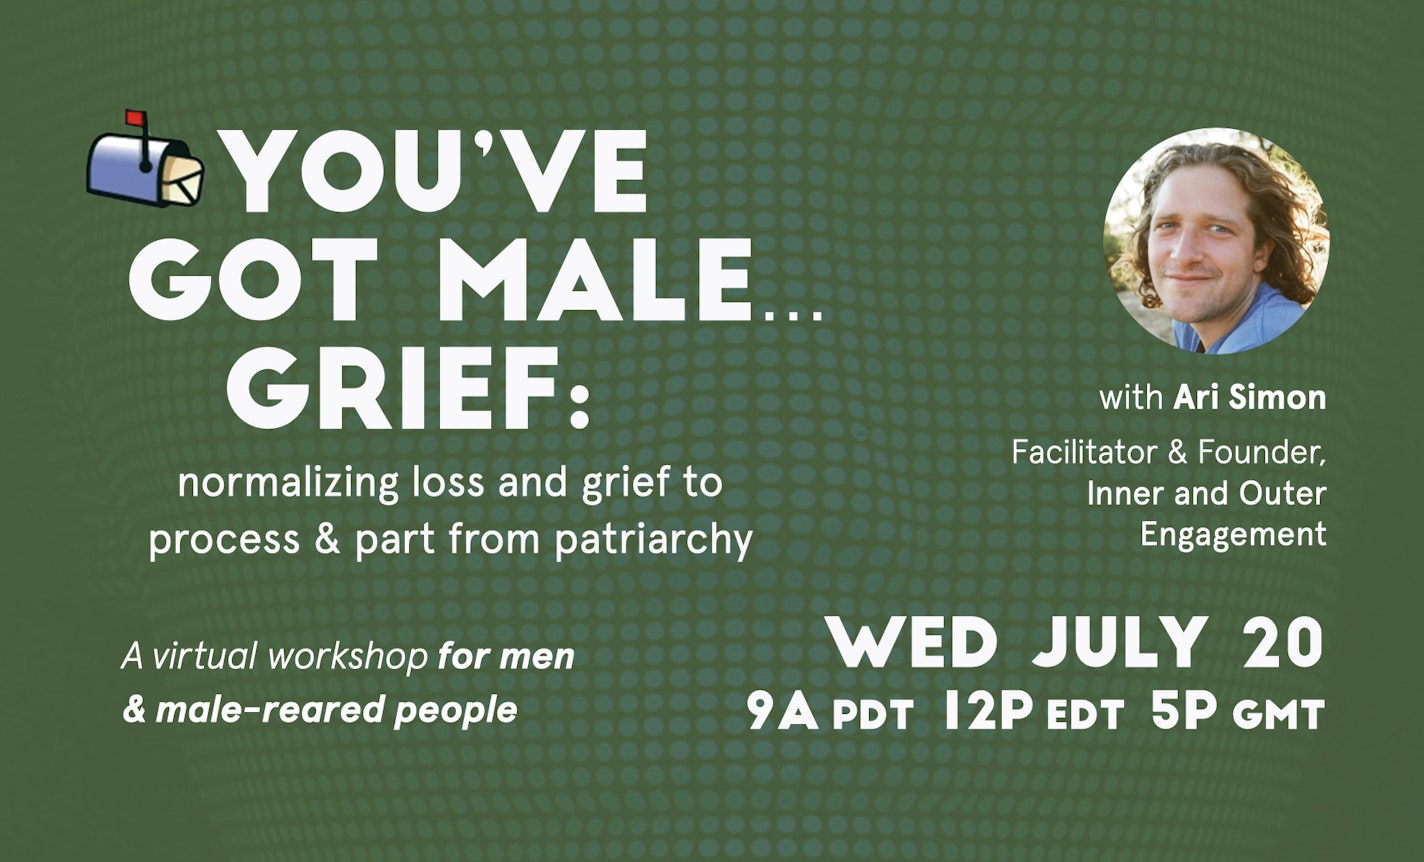 You've Got Male Grief: Processing & Parting from Patriarchy